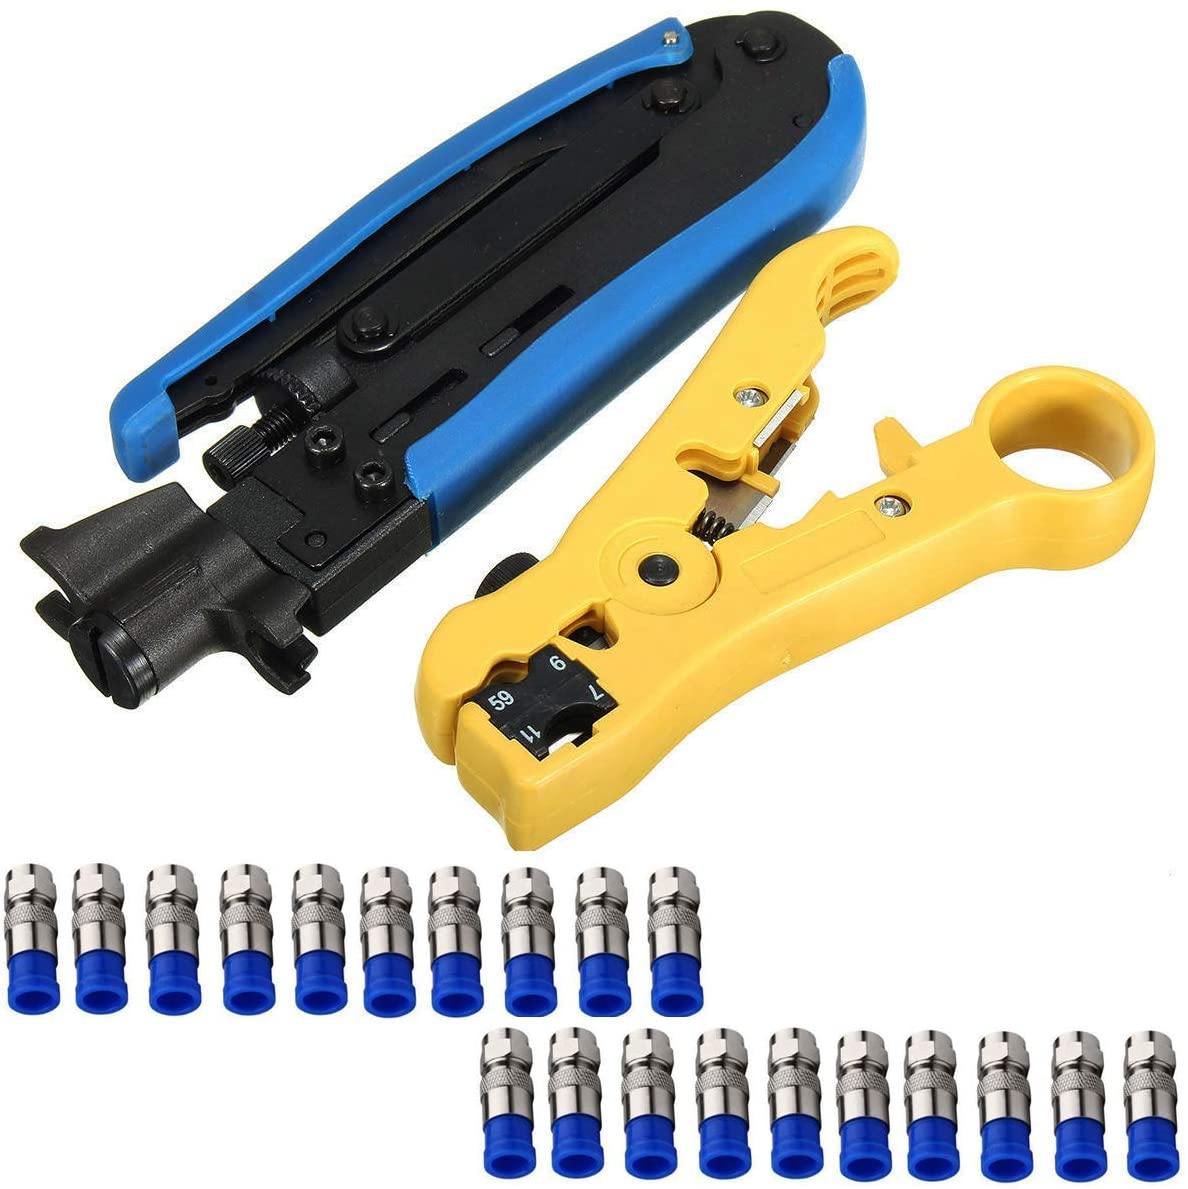 coax cable crimping tool